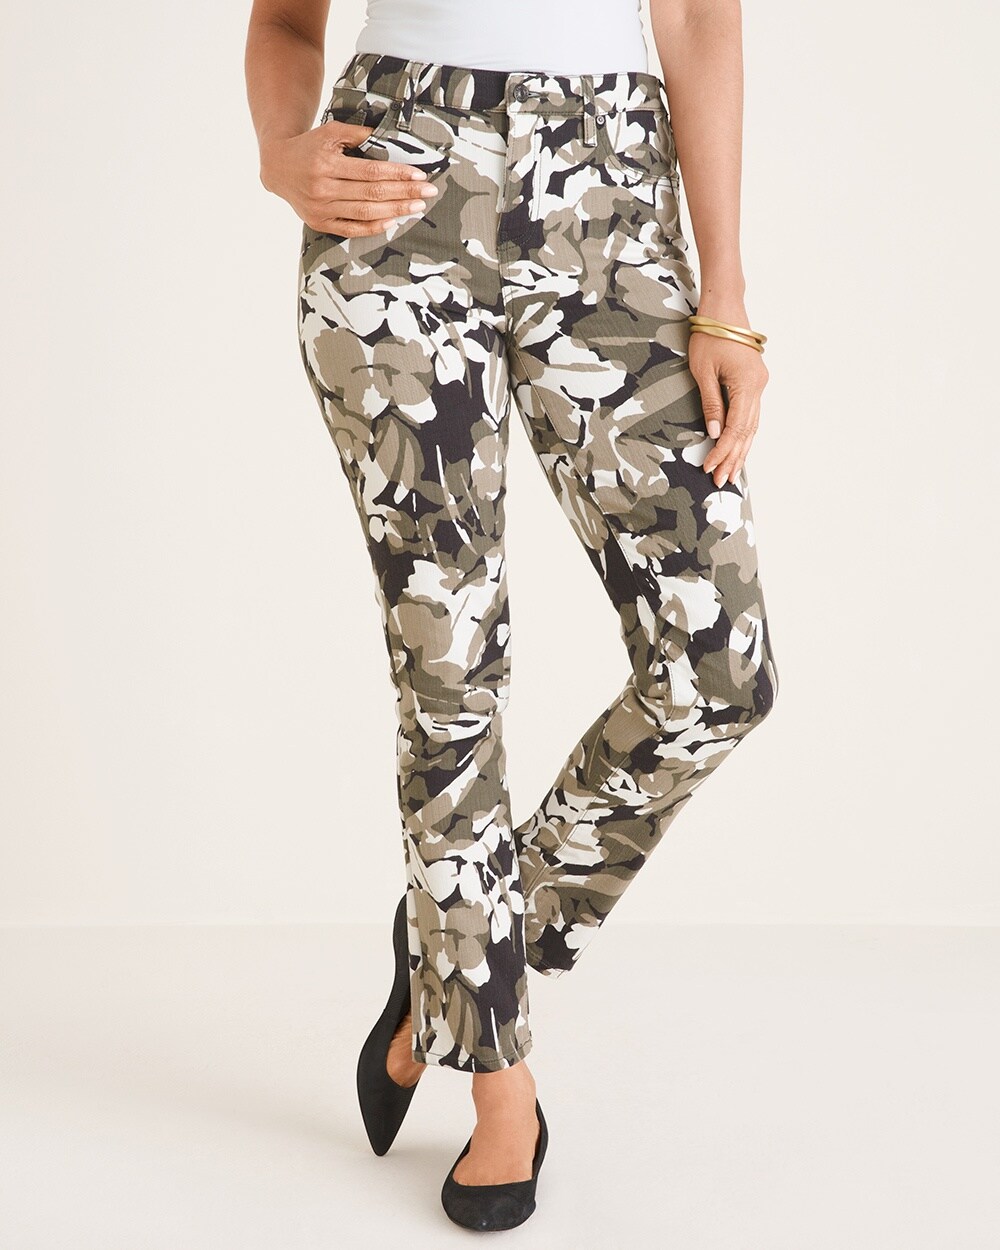 So Slimming Camo-Floral Print Girlfriend Ankle Jeans